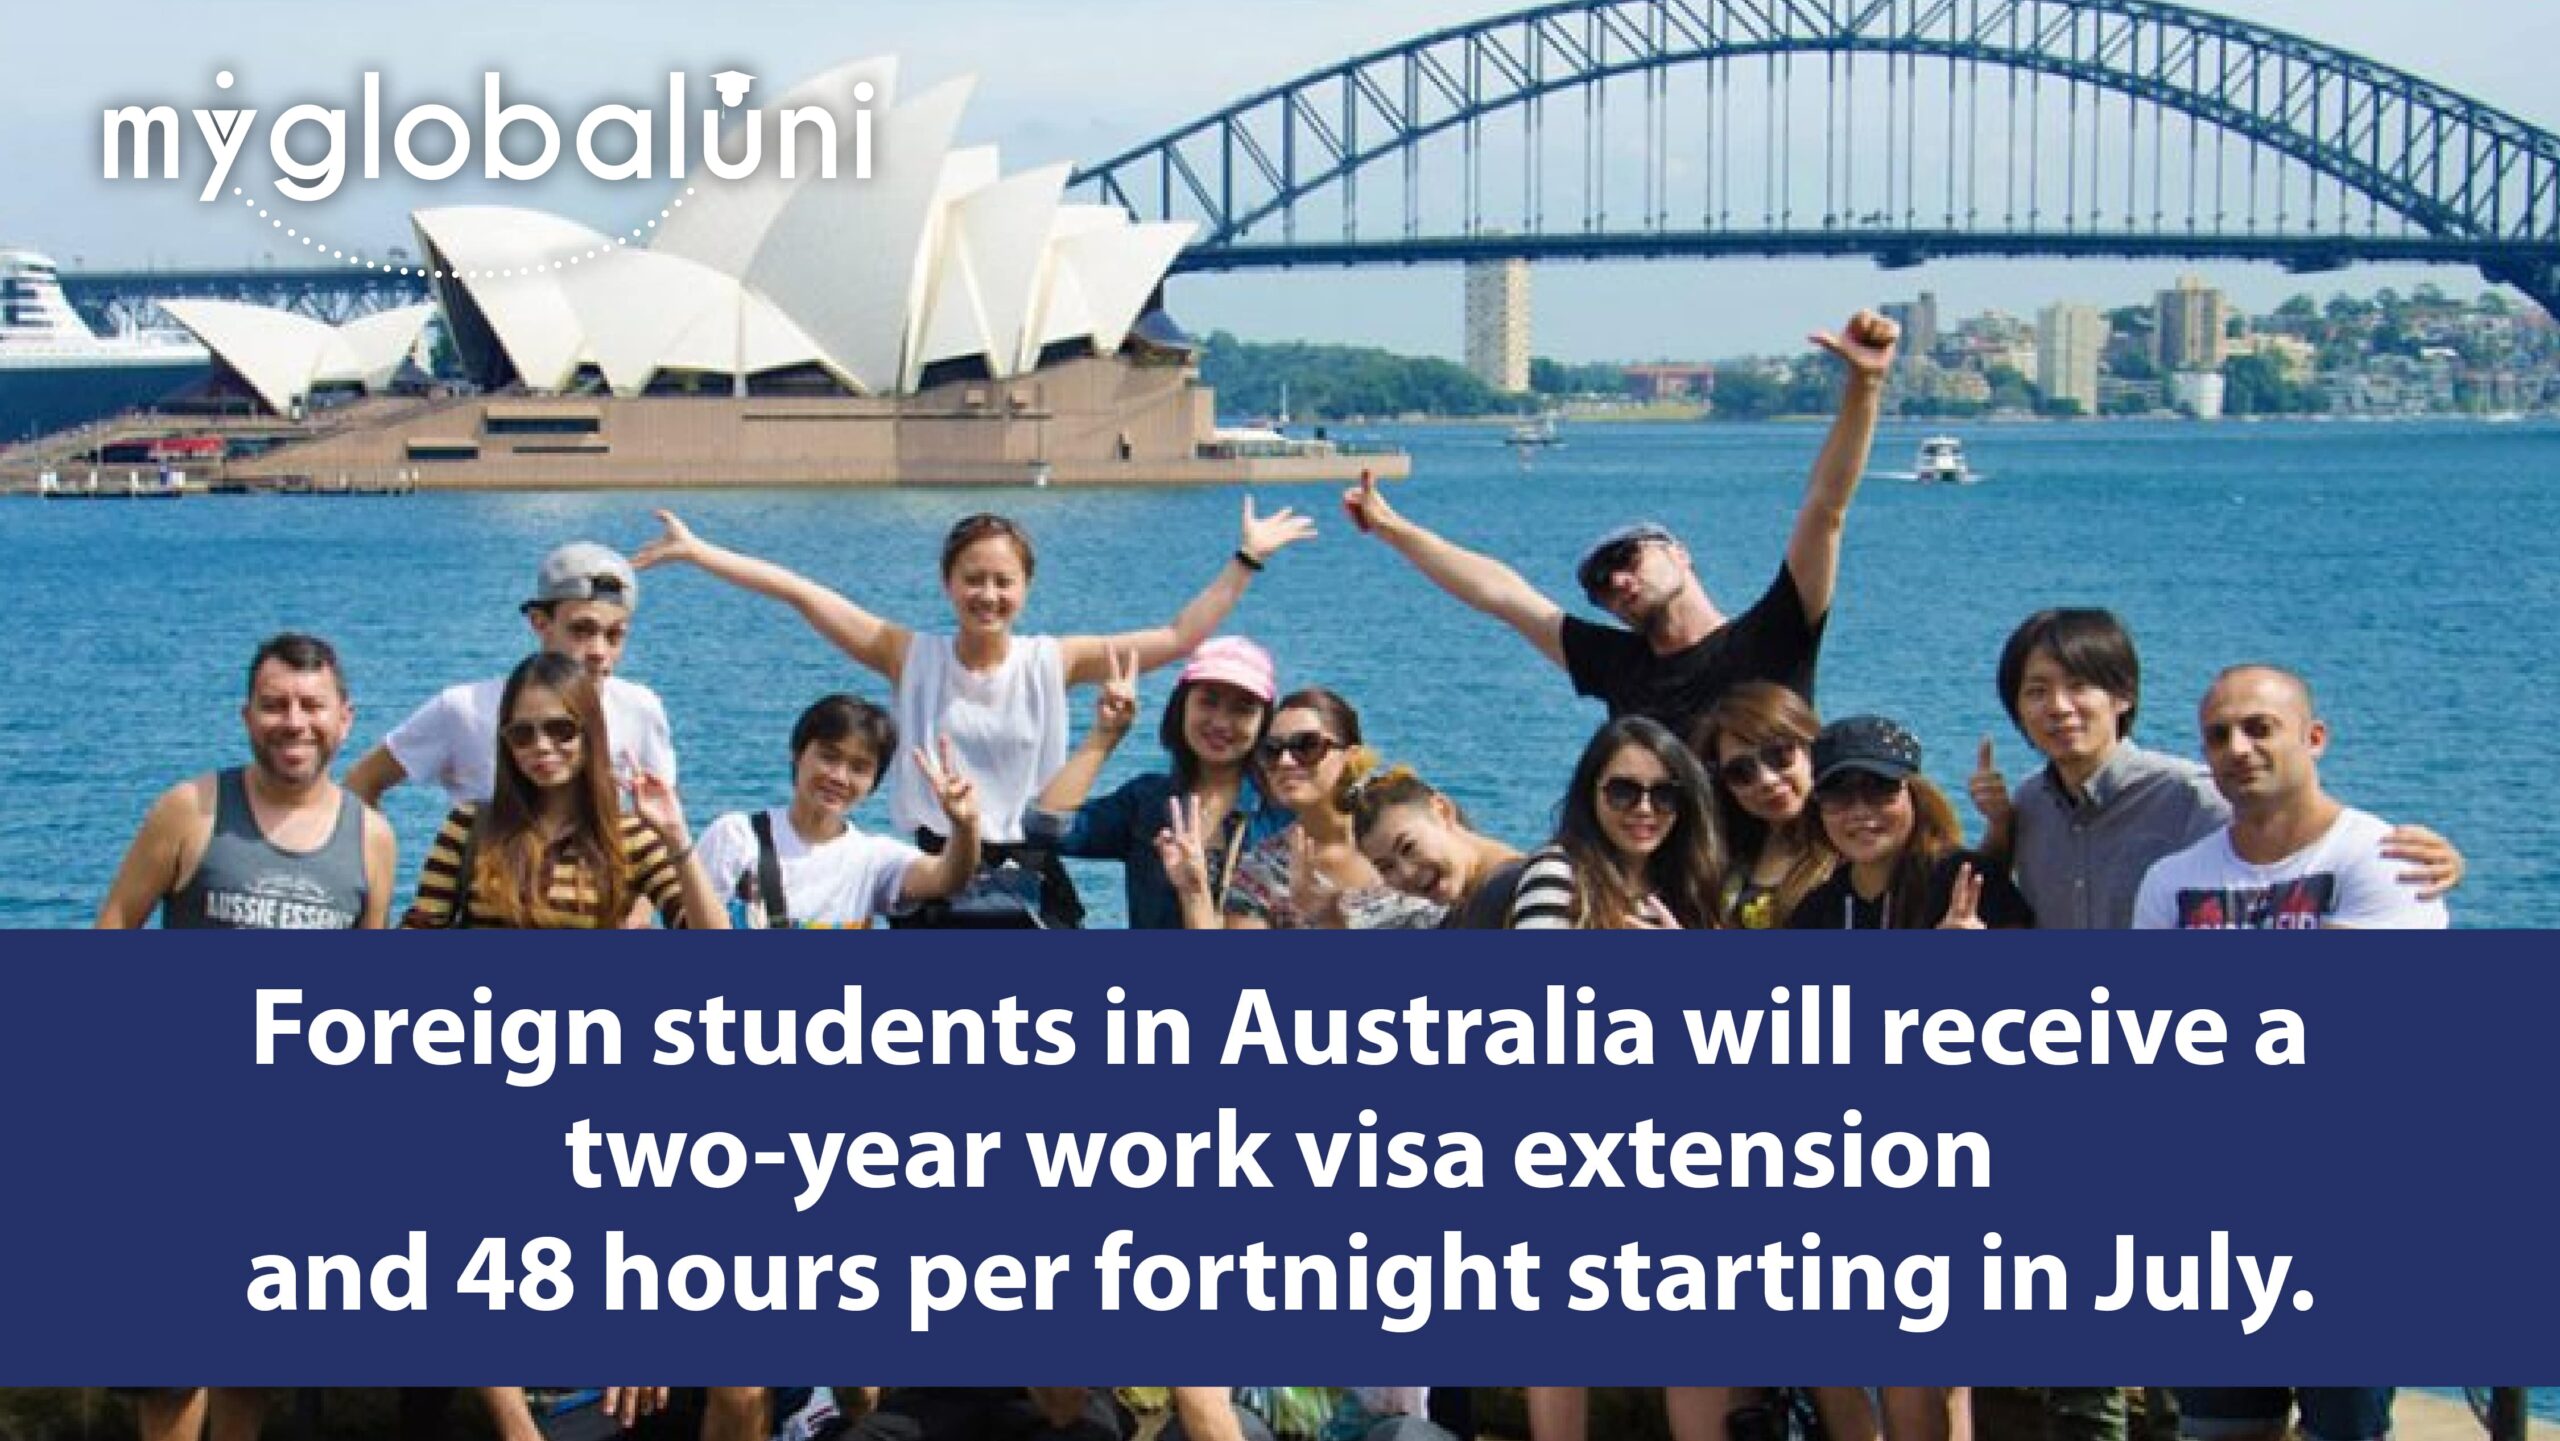 Foreign students in Australia will receive a two-year work visa extension and 48 hours per fortnight starting in July.